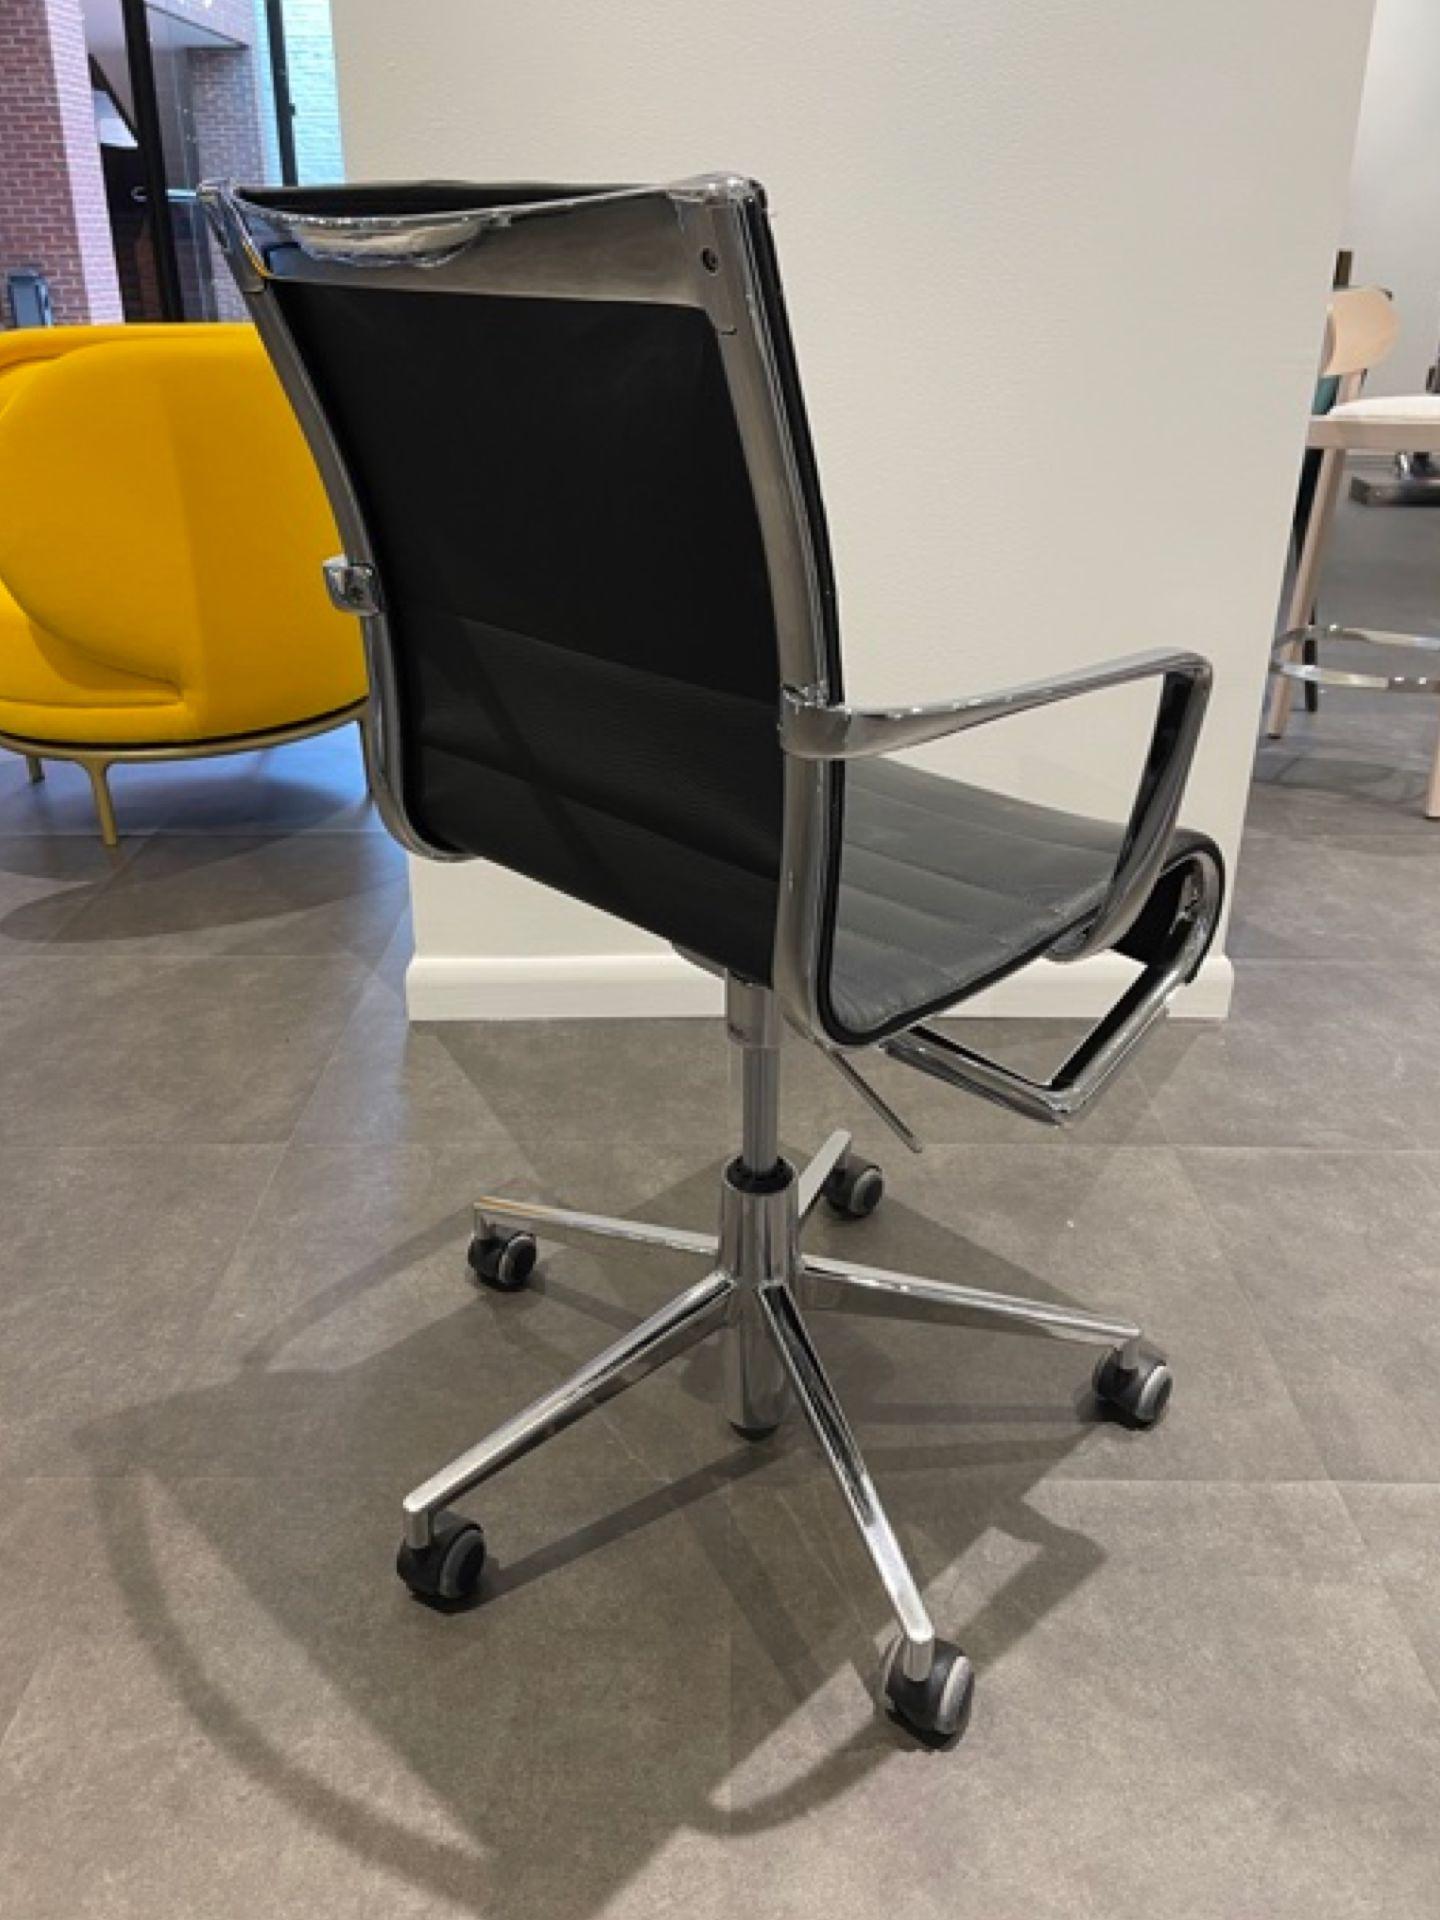 The Frame collection is characterised by an extruded aluminium and stove enamelled die casting components. 

The Rolling Frame chairs have a five-star base with castors,